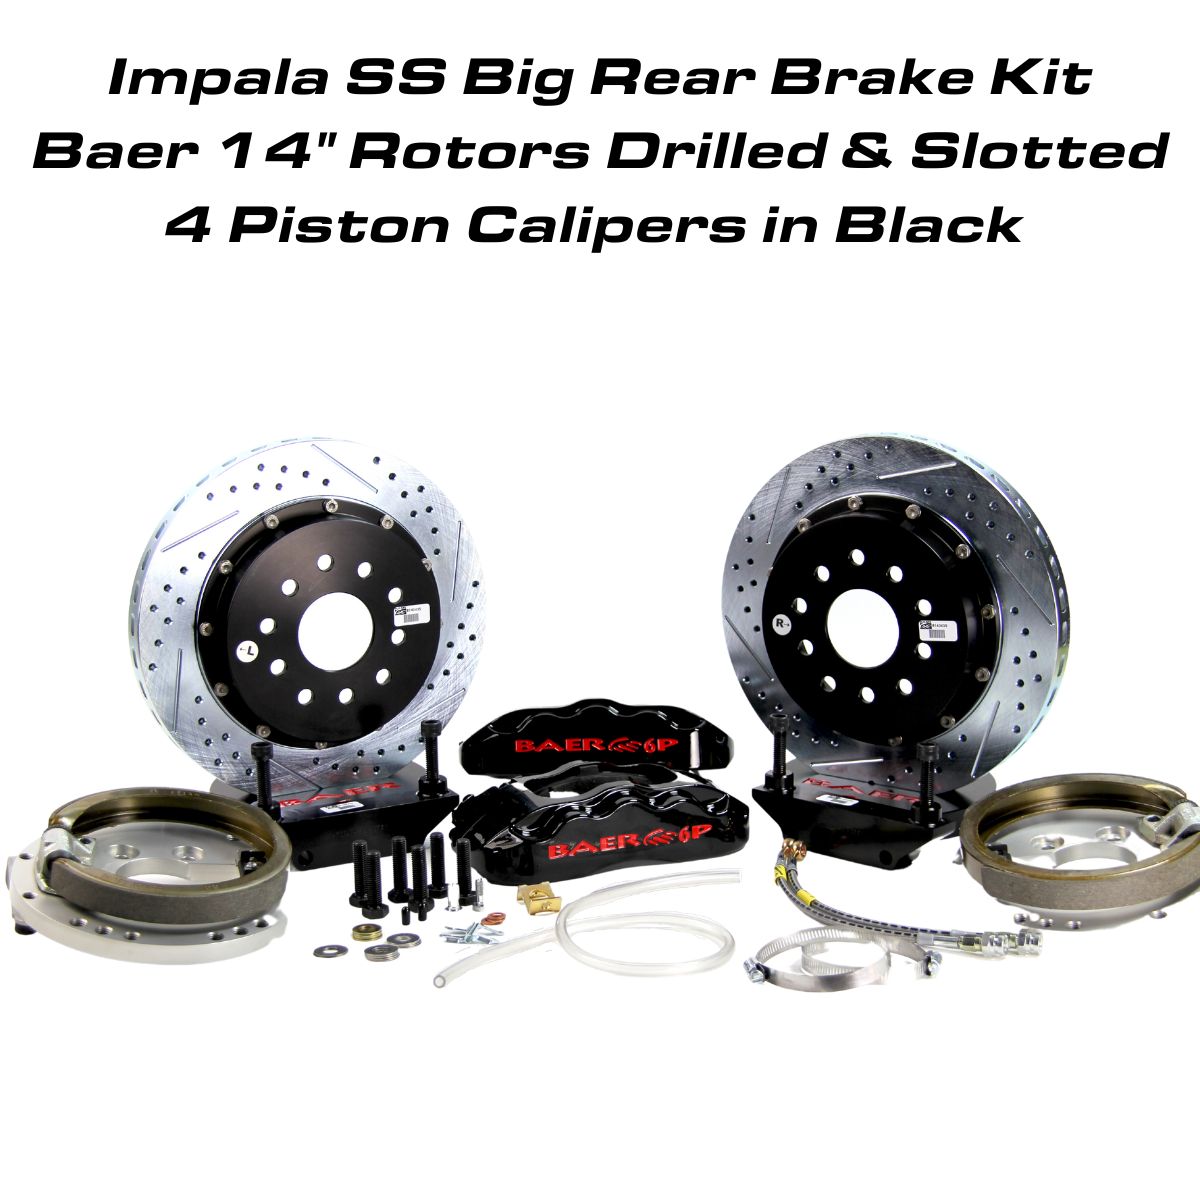 Impala SS Big Rear Brake Kit, 14 Inch Baer Rotors, 6 Piston Forged 6P Calipers, Drilled and Slotted, Black Calipers